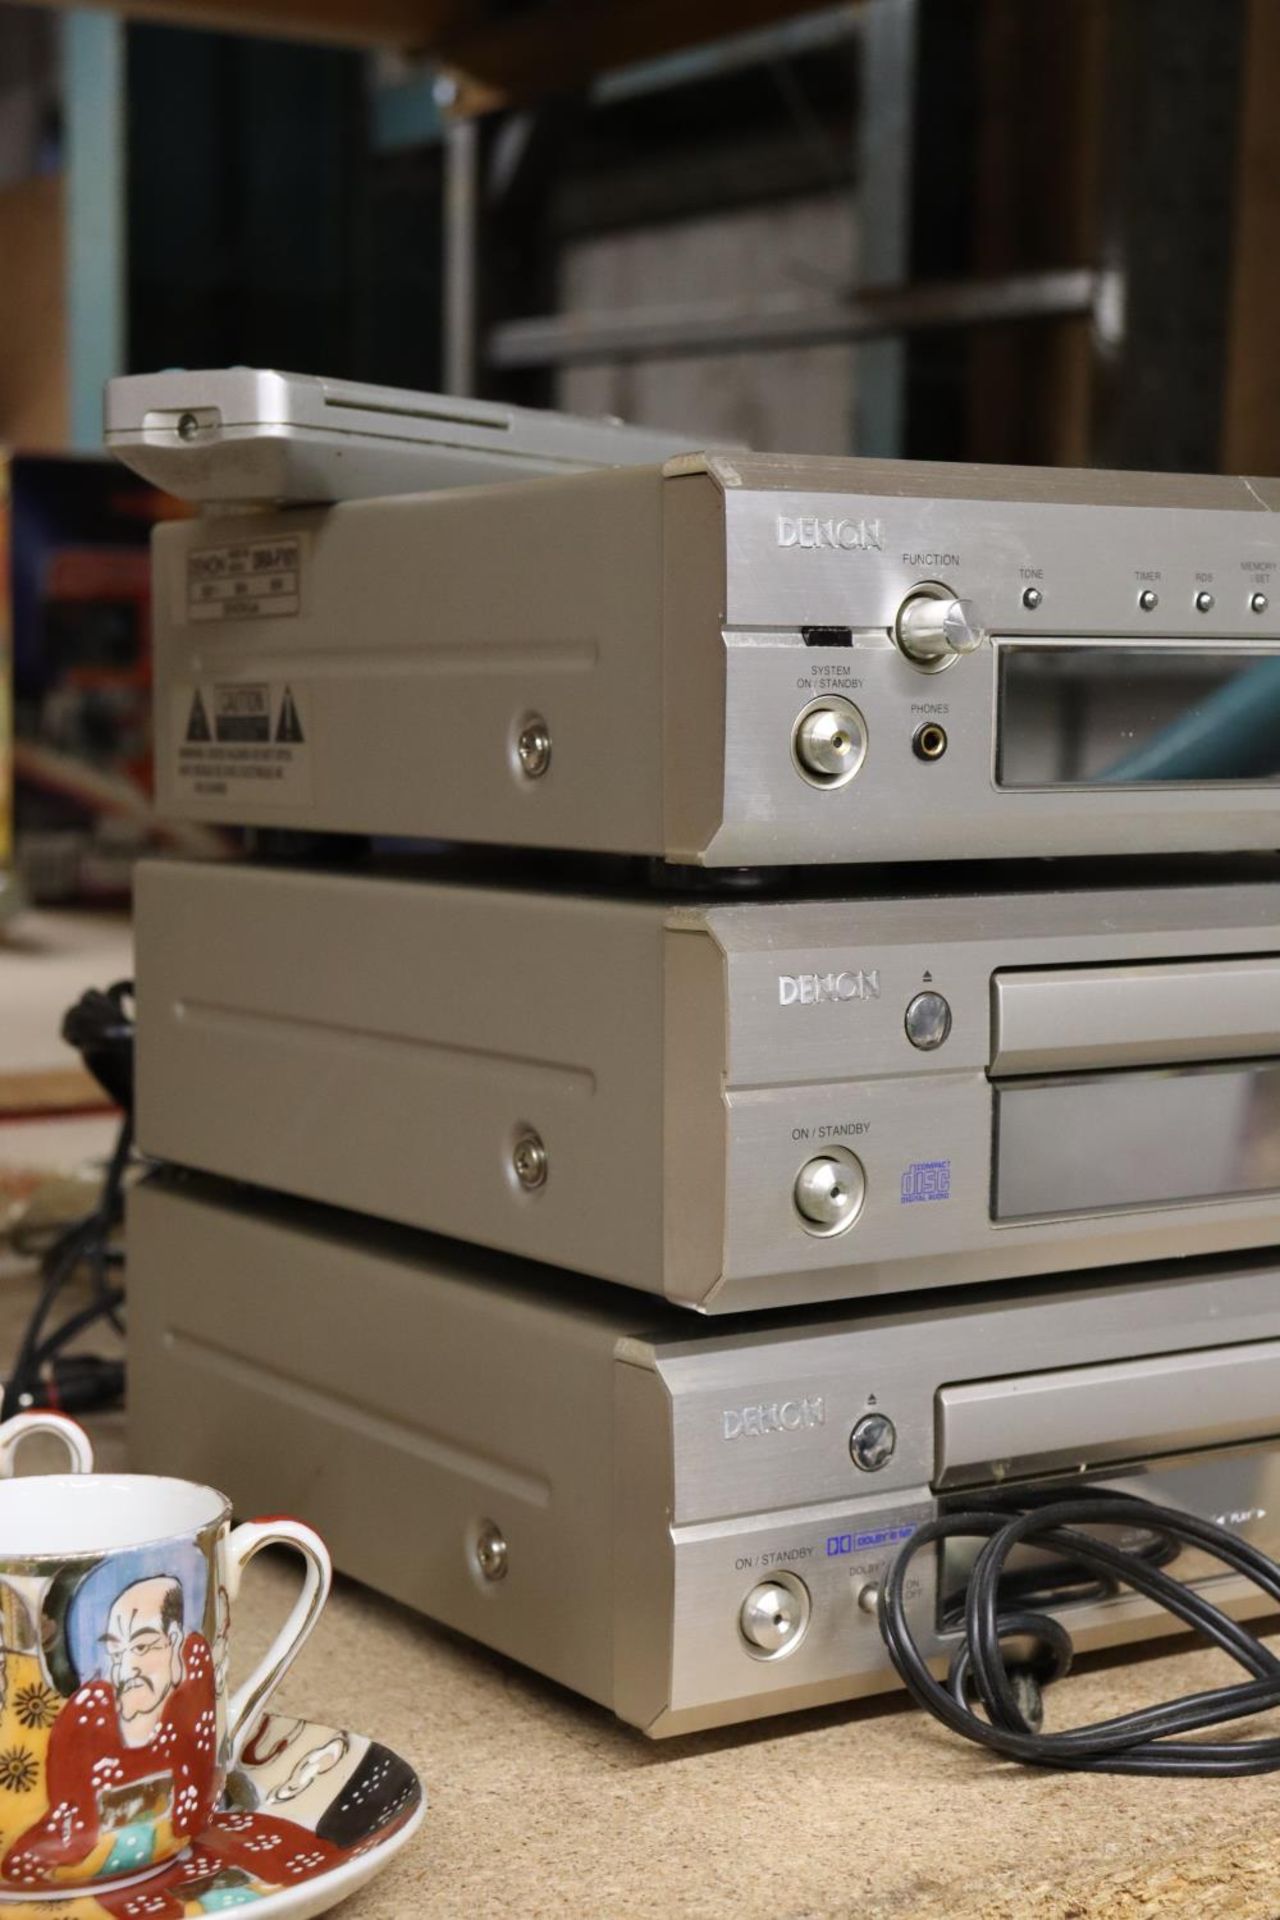 THREE RARE DENON SEPERATES WITH REMOTE CONTROL TO INCLUDE A STEREO RECEIVER, COMPACT DISC PLAYER AND - Image 2 of 4